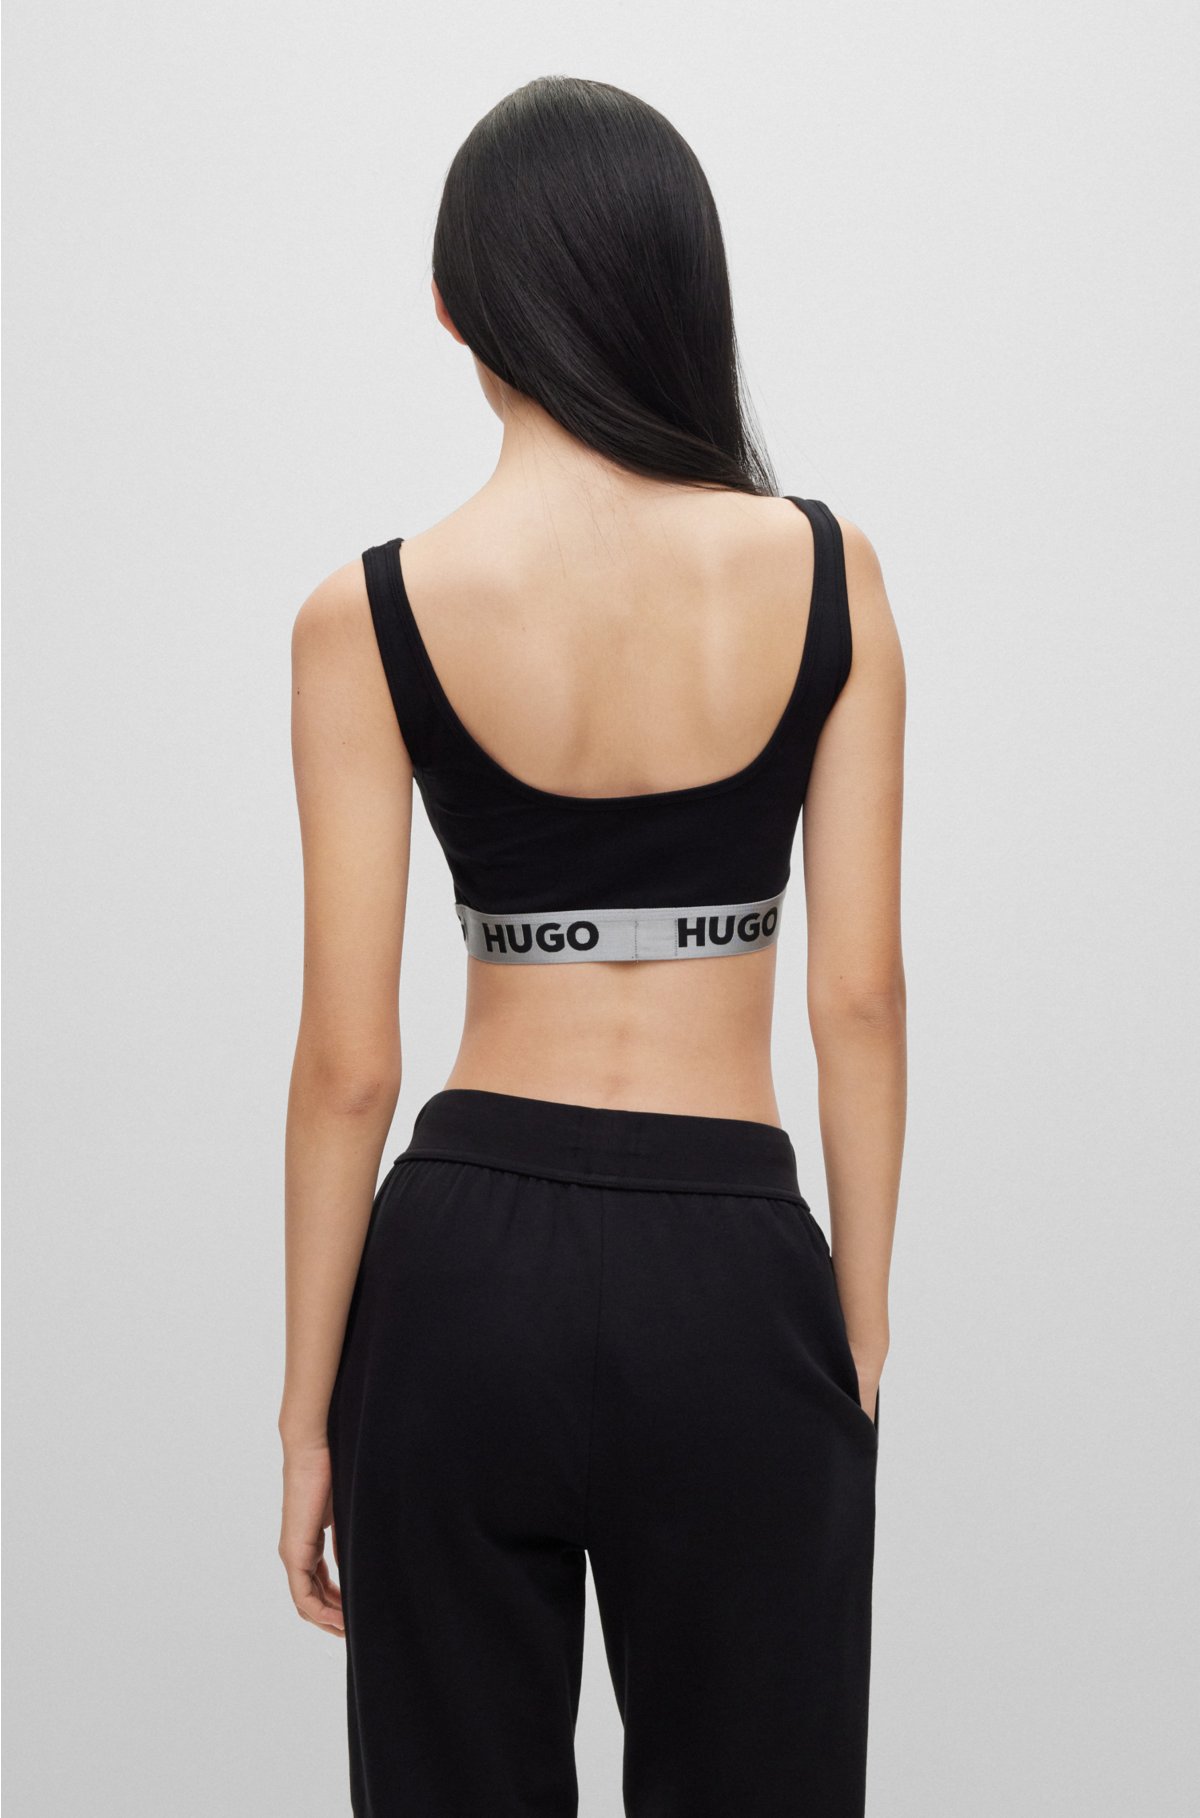 HUGO - Stretch-cotton bralette with contrast logo band